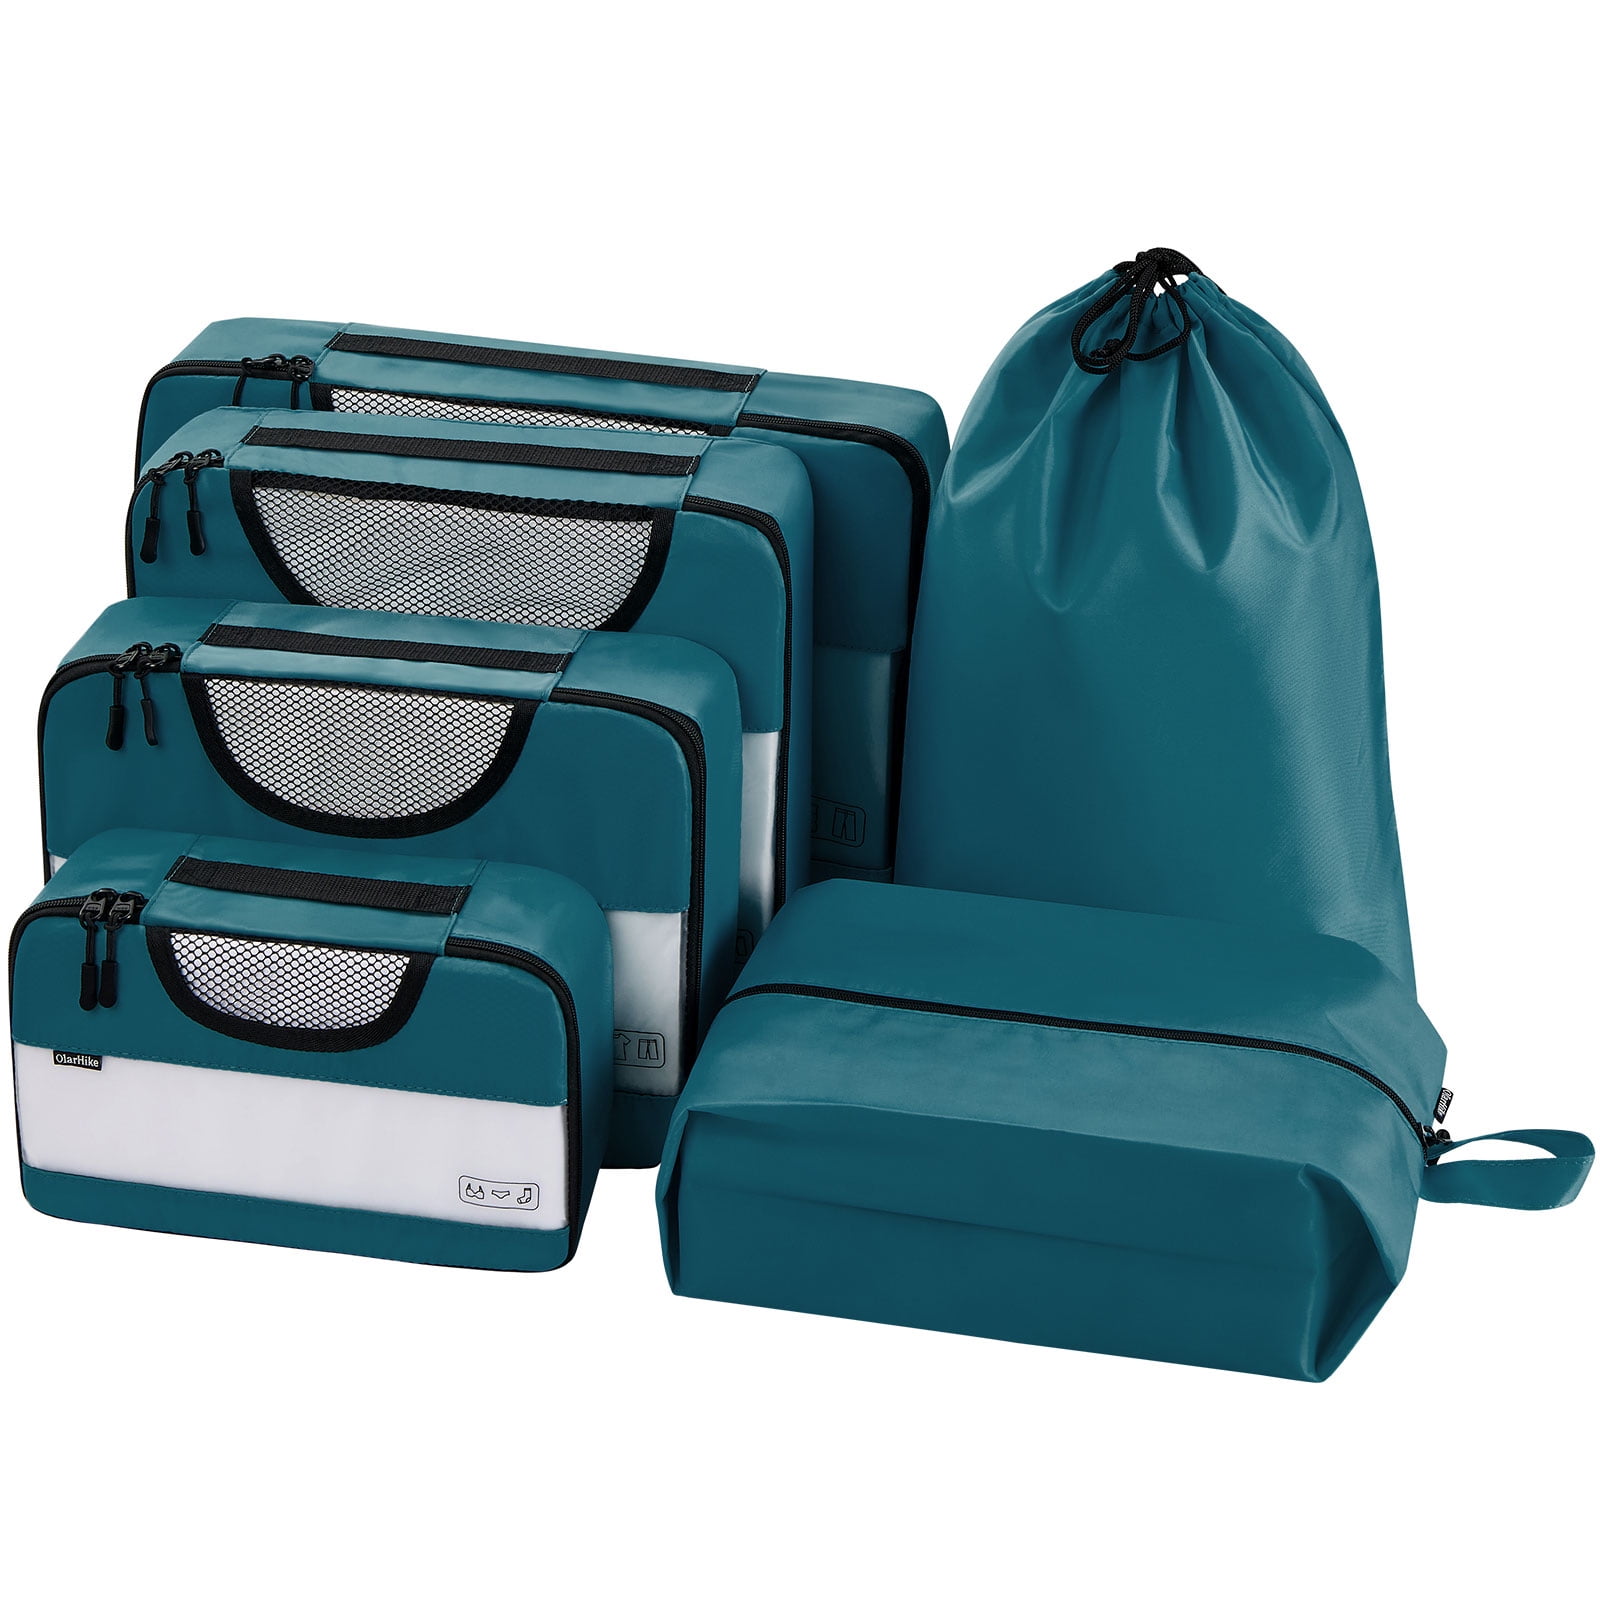 Blue 6 Set Travel Organizer Bags for Luggage with Shoe Bag 